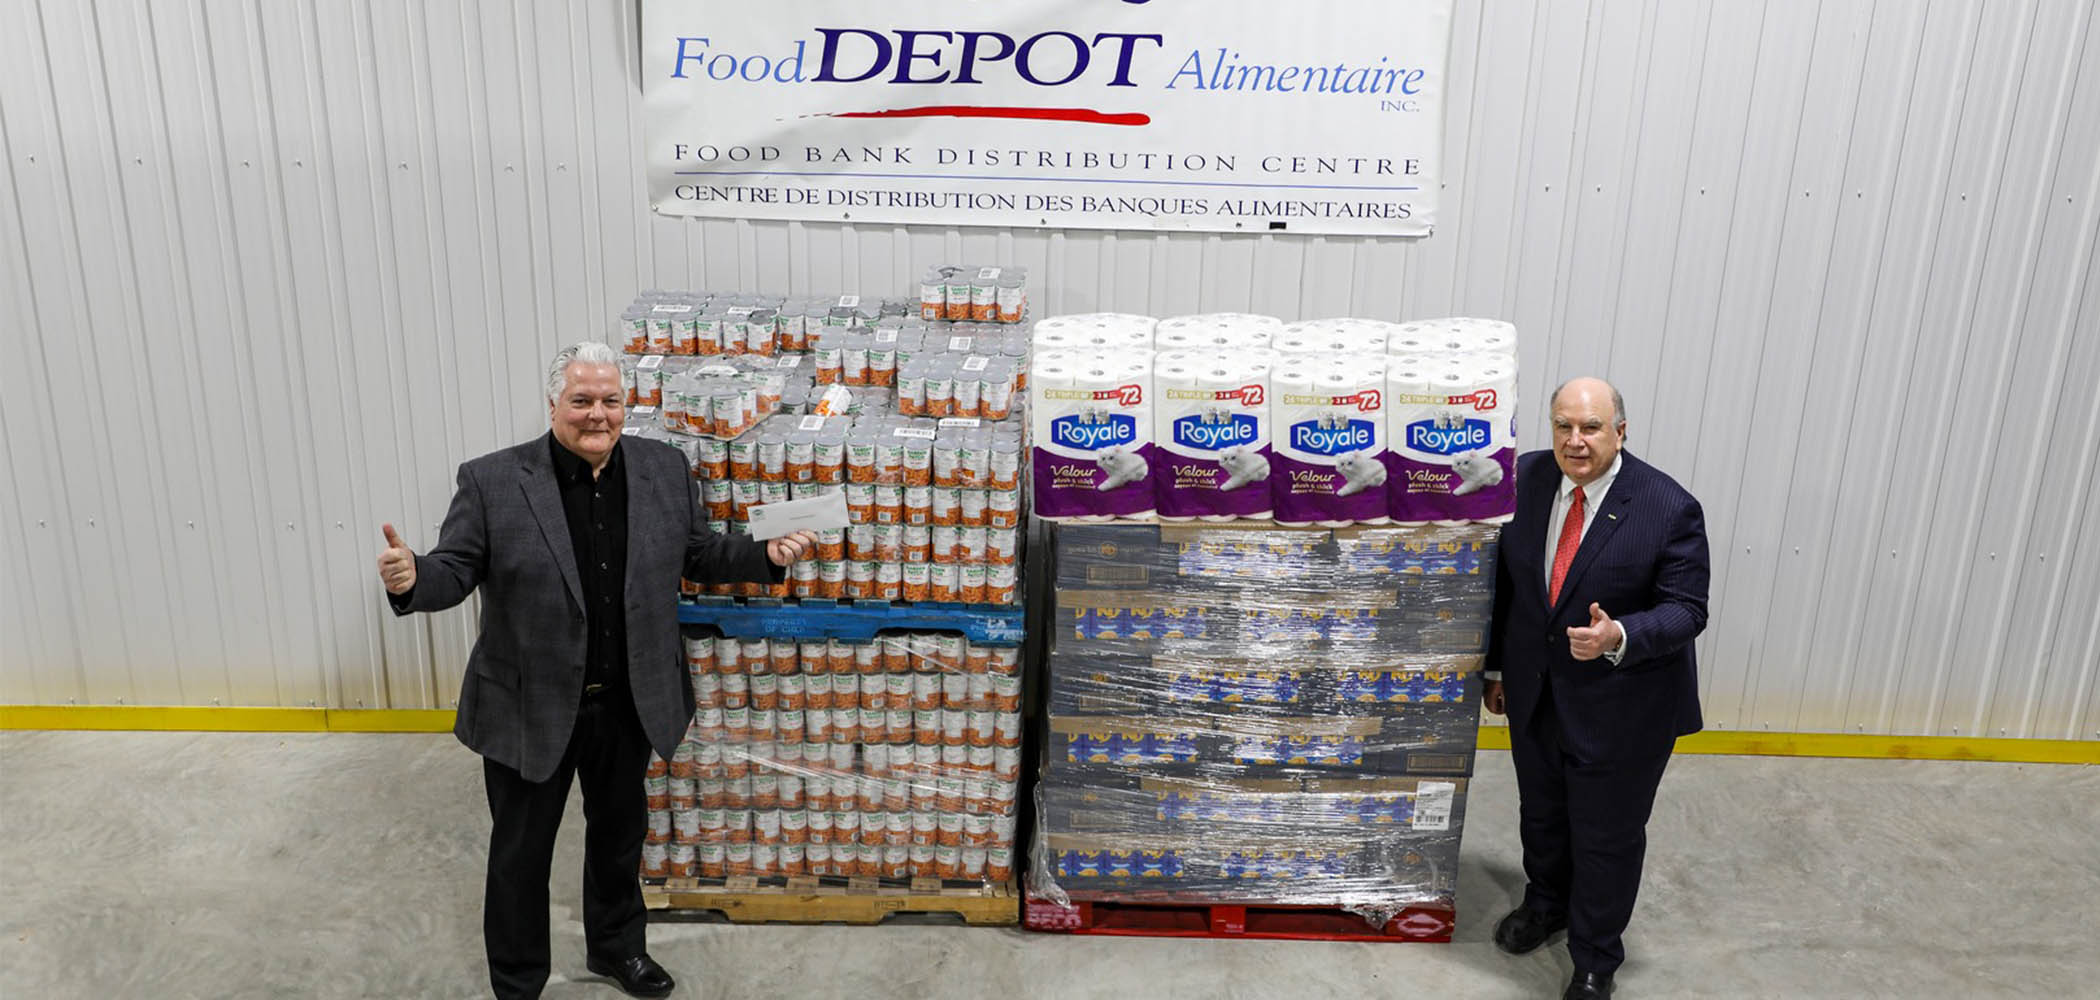 Cavendish Farms donates food and personal care products to Food Banks across New Brunswick 